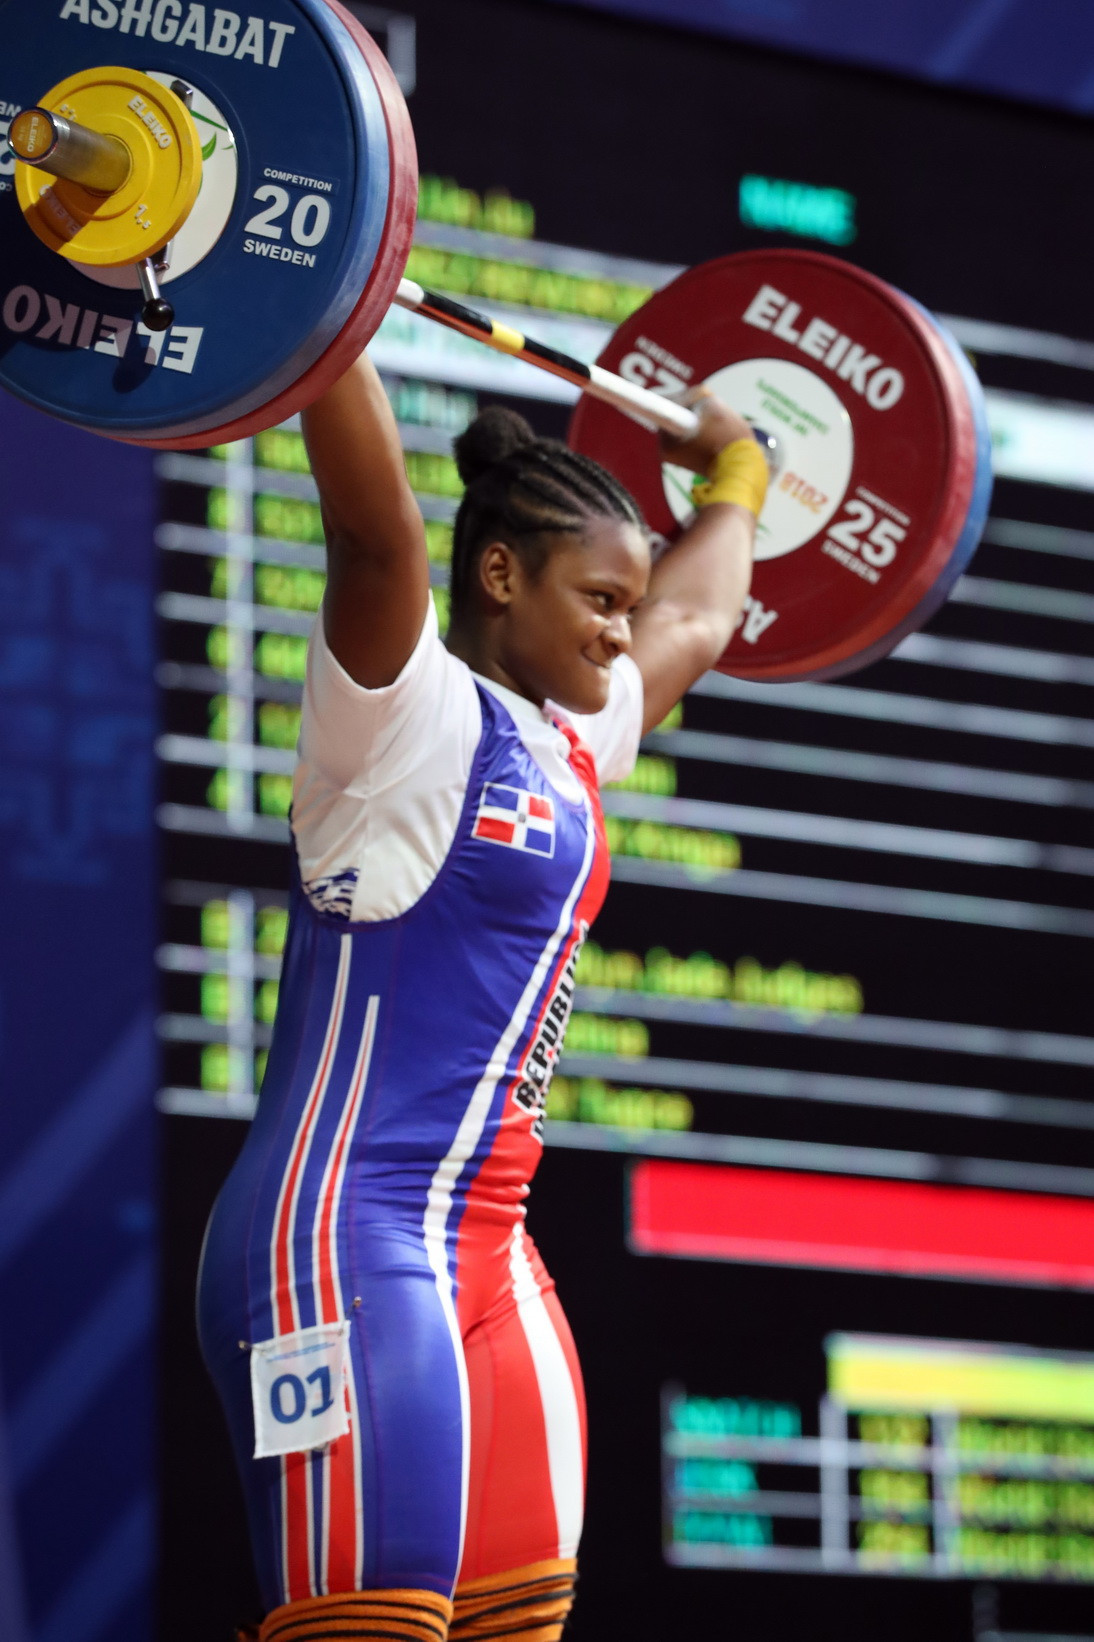 The Dominican Republic’s Crismery Dominga Santana Peguero won the bronze medal in the total ©IWF